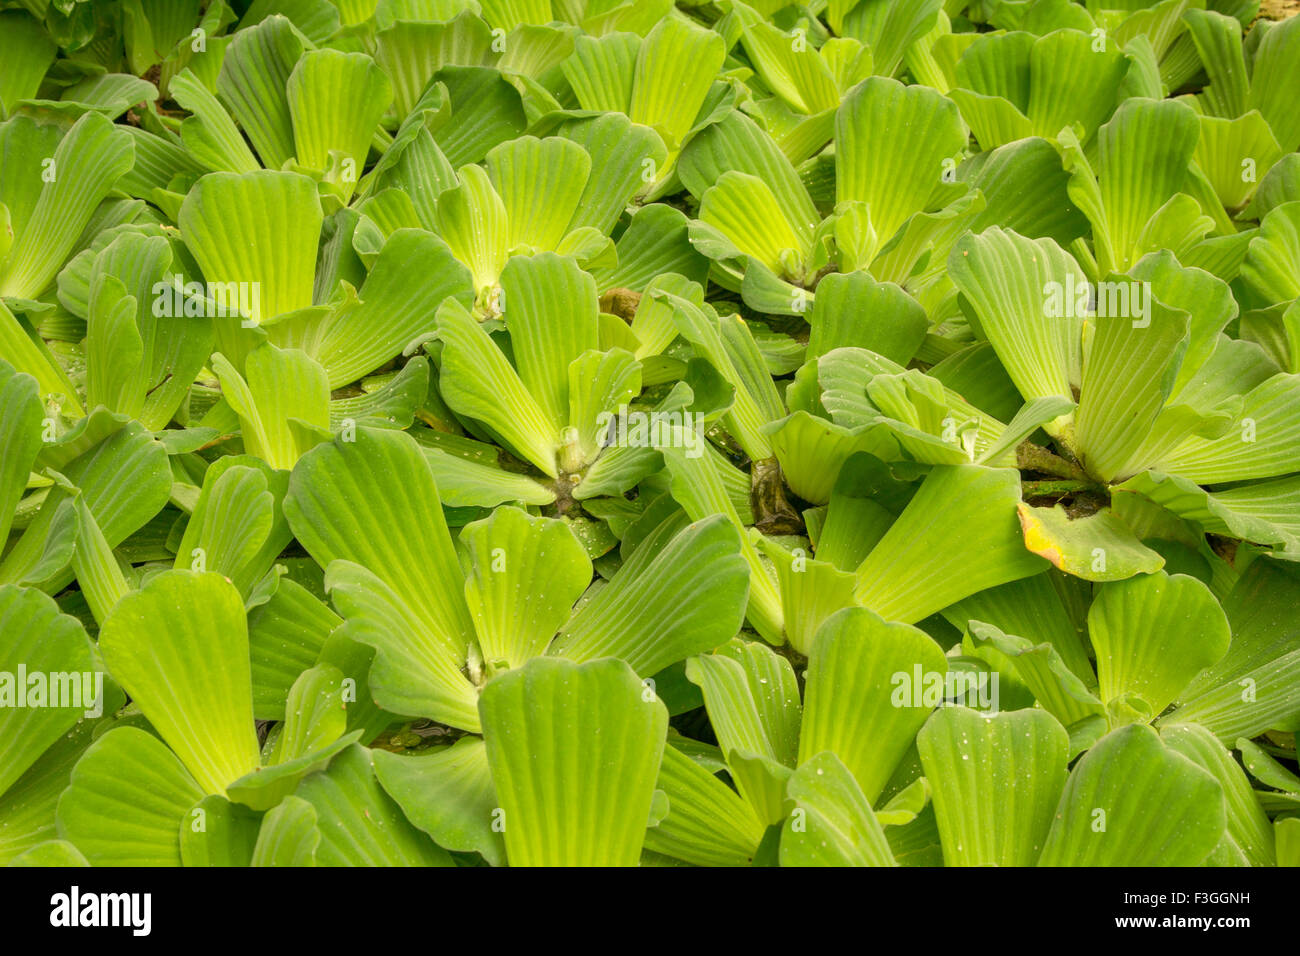 natural floral background of aquatic plant  Pistia stratiotes Stock Photo